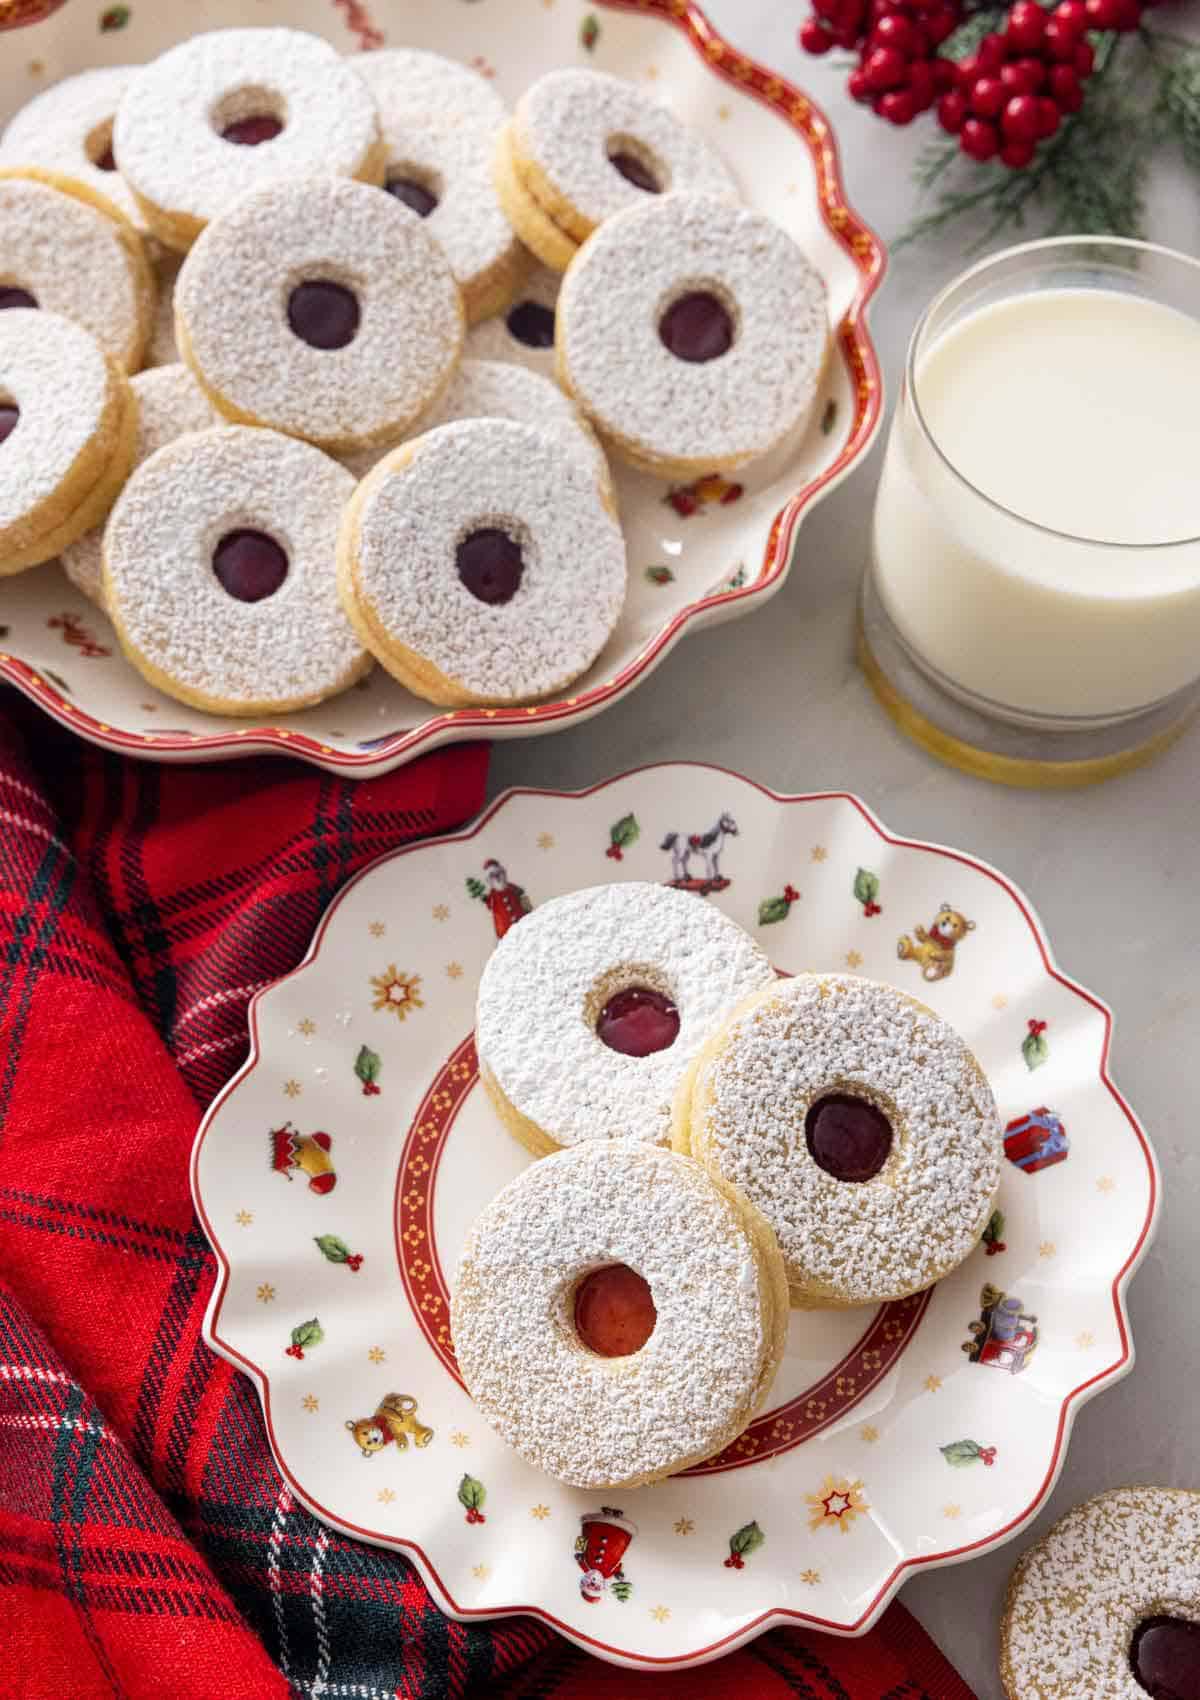 A plate with three linzer cookies by a mug of milk and a platter of cookies.